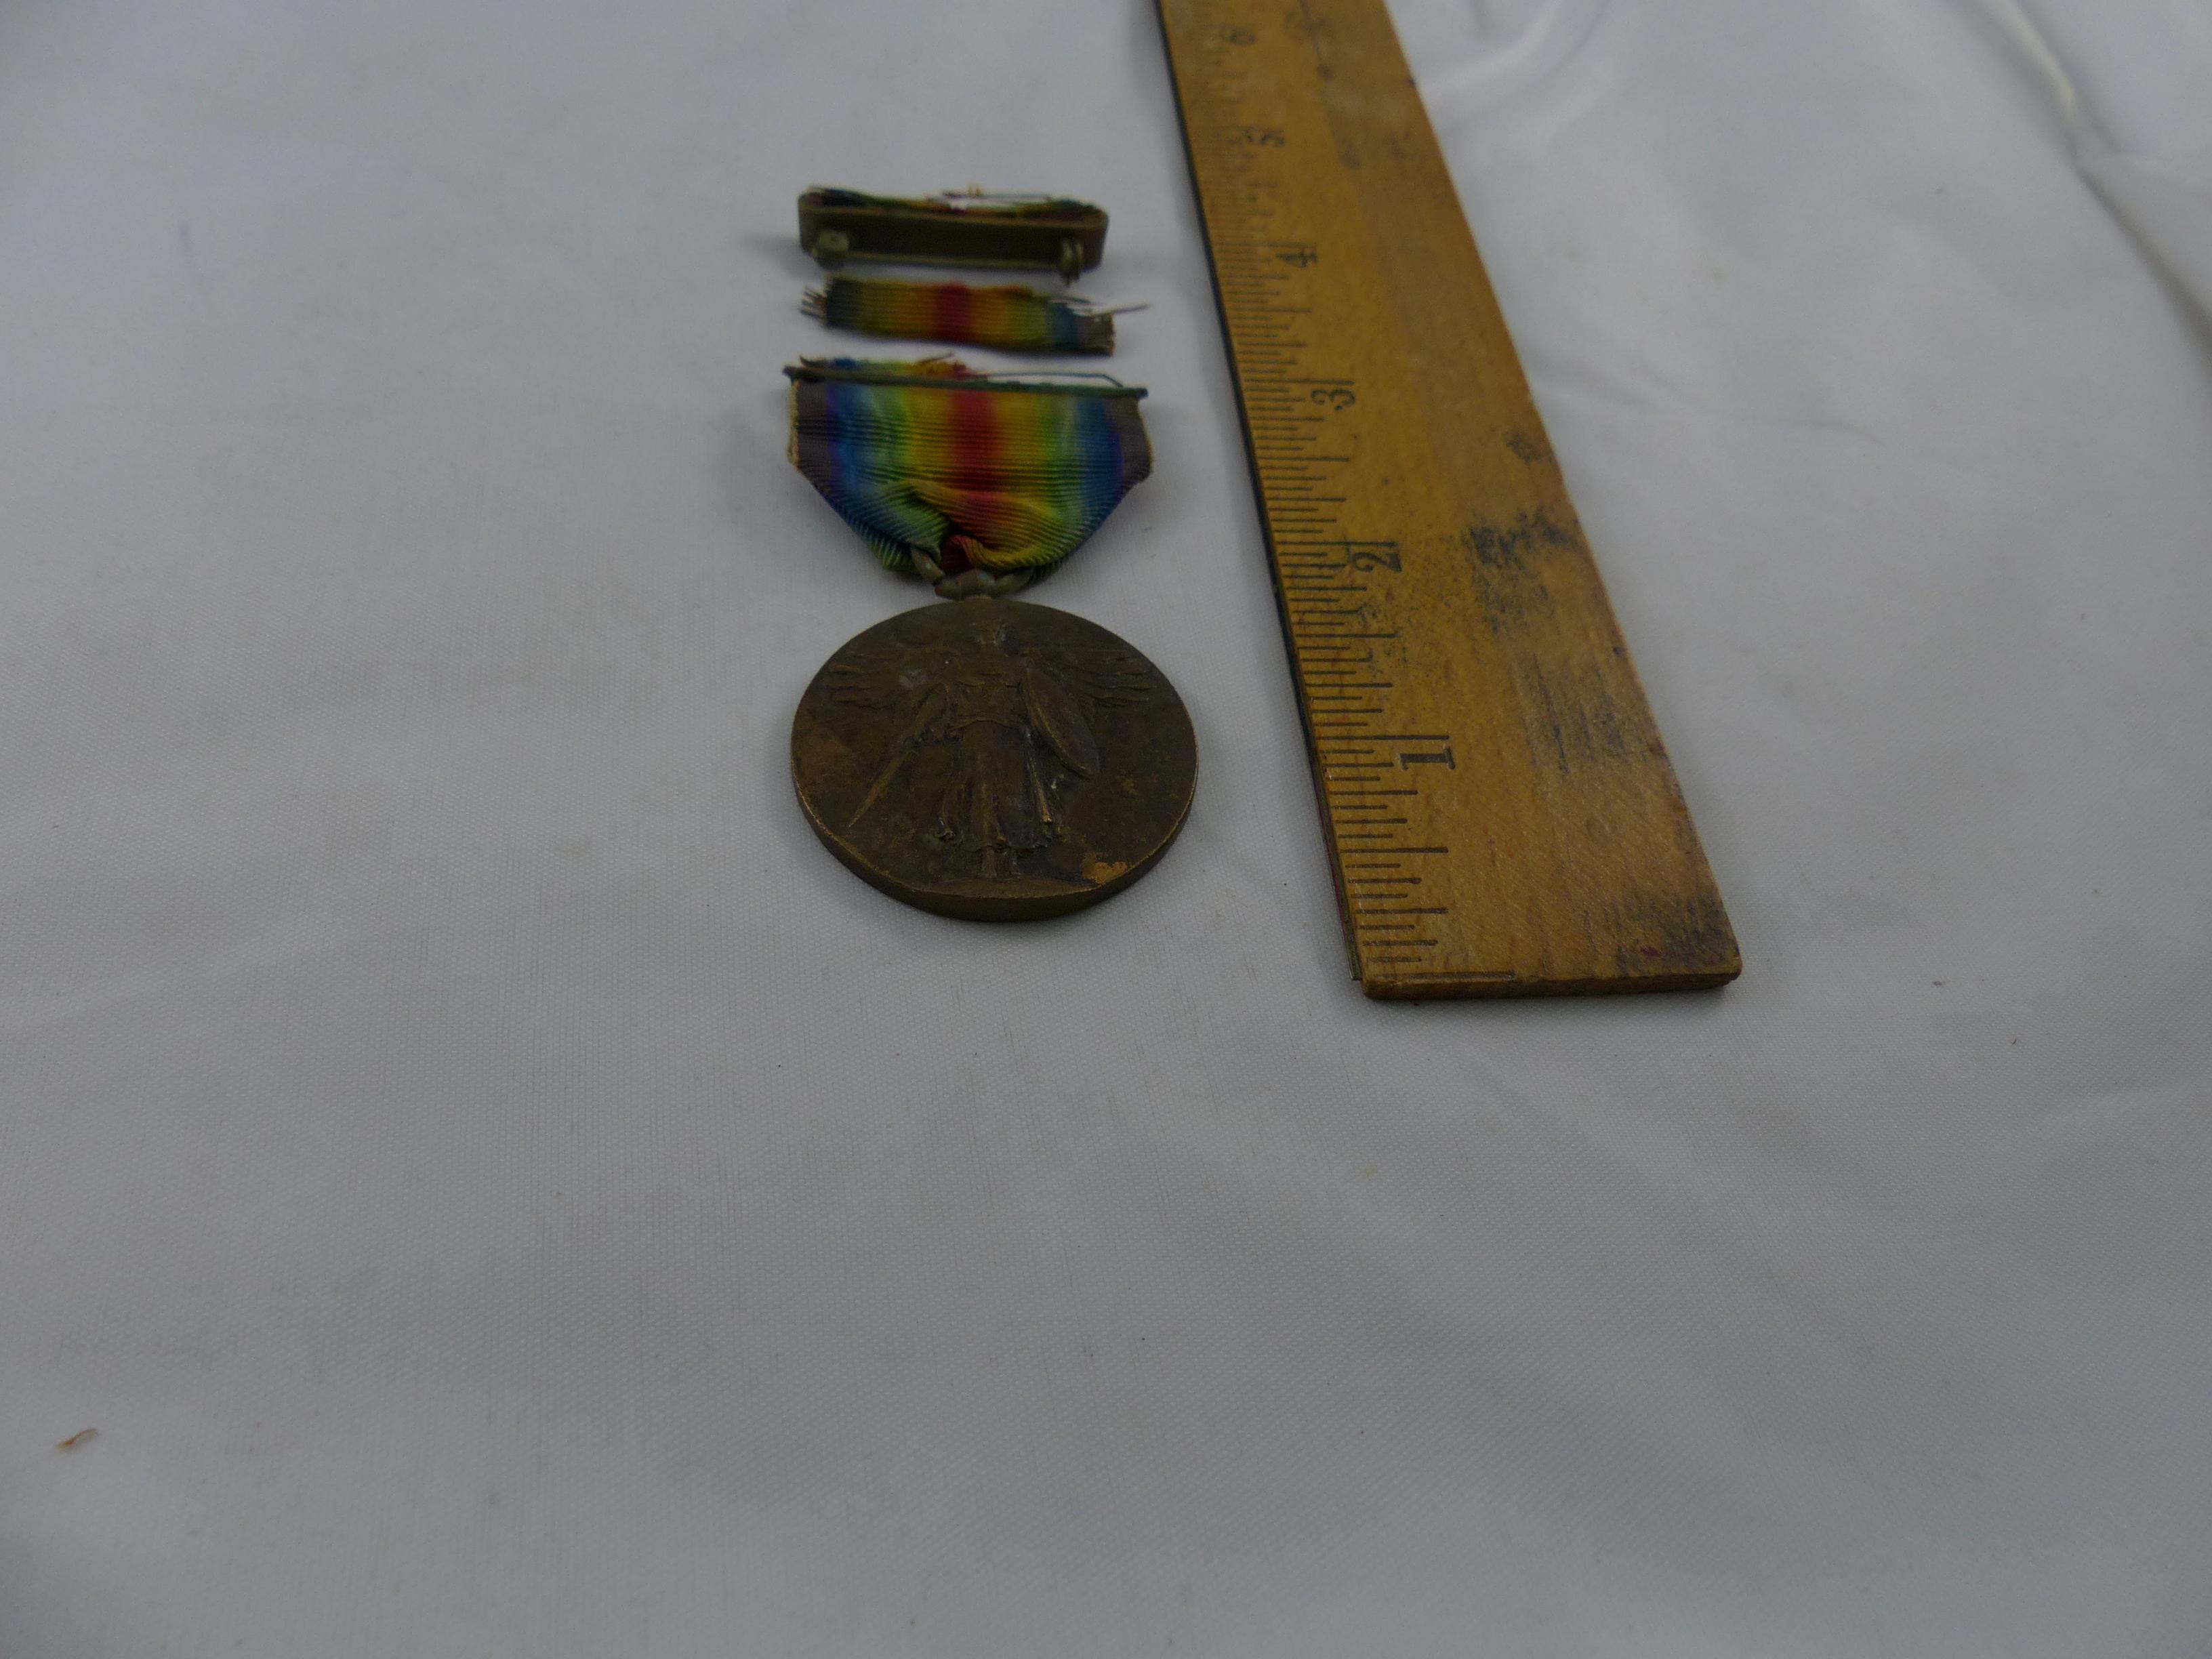 Vintage Antique Pins and Medals